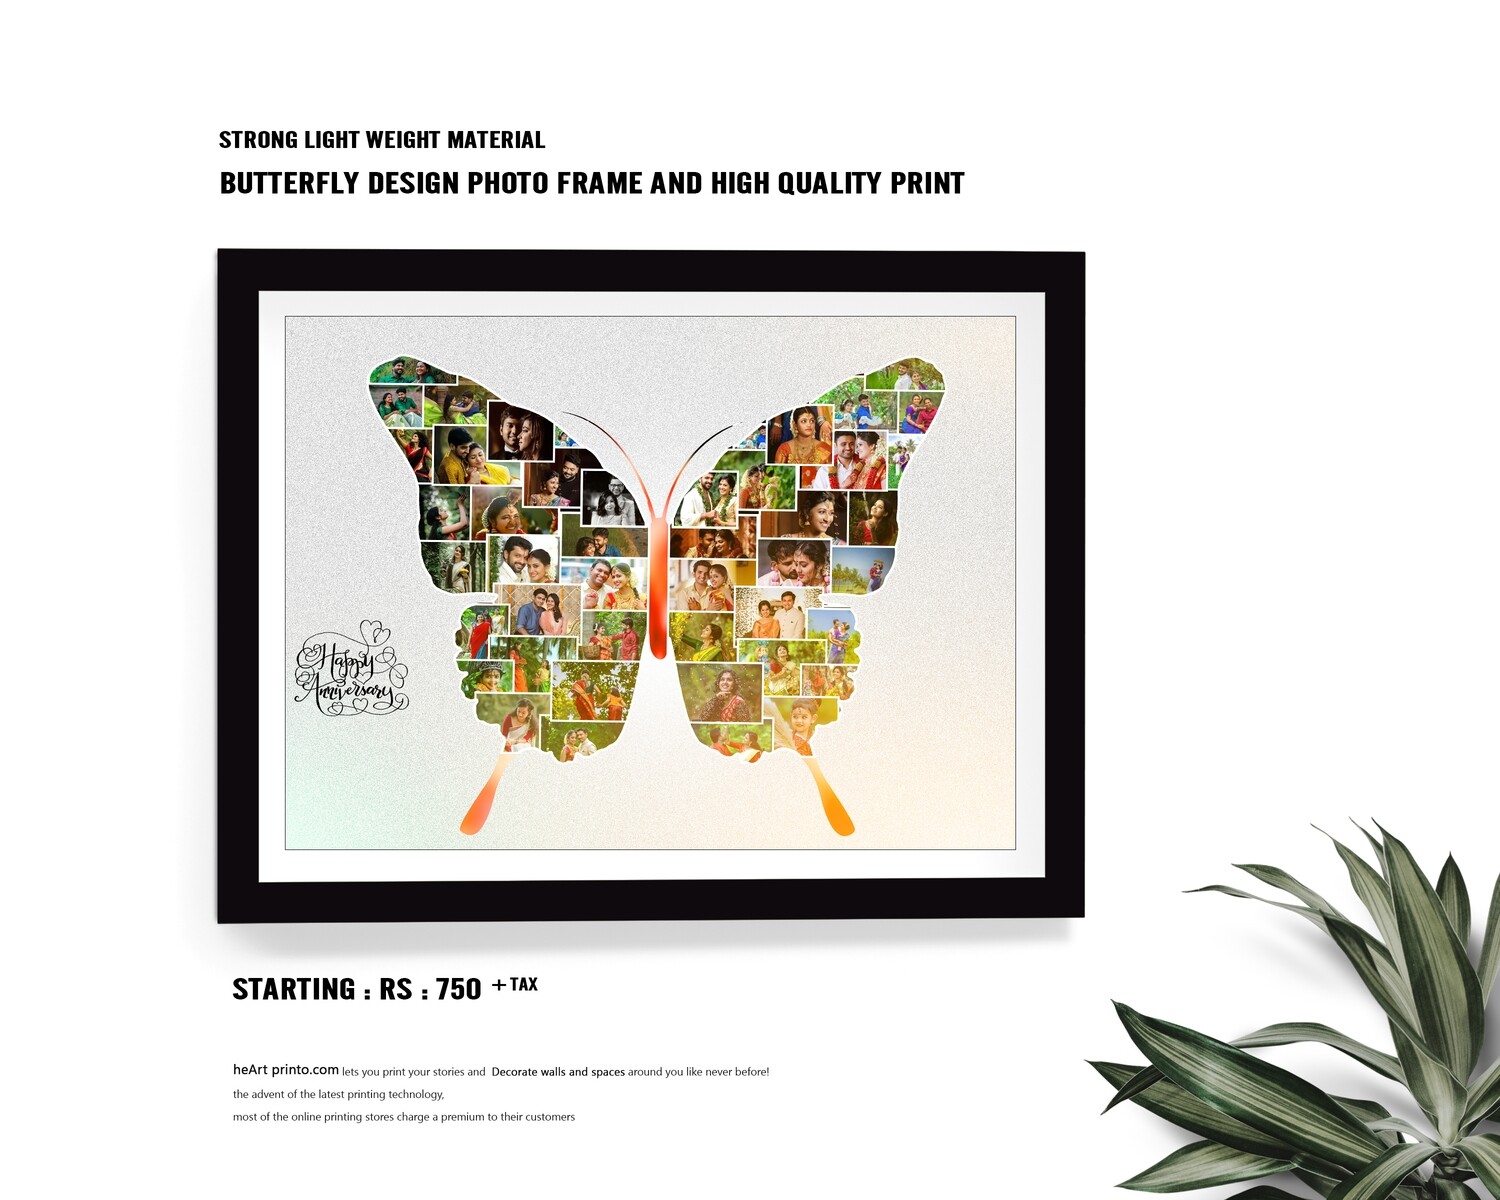 Butterfly Design Photo Frame and High Quality Print